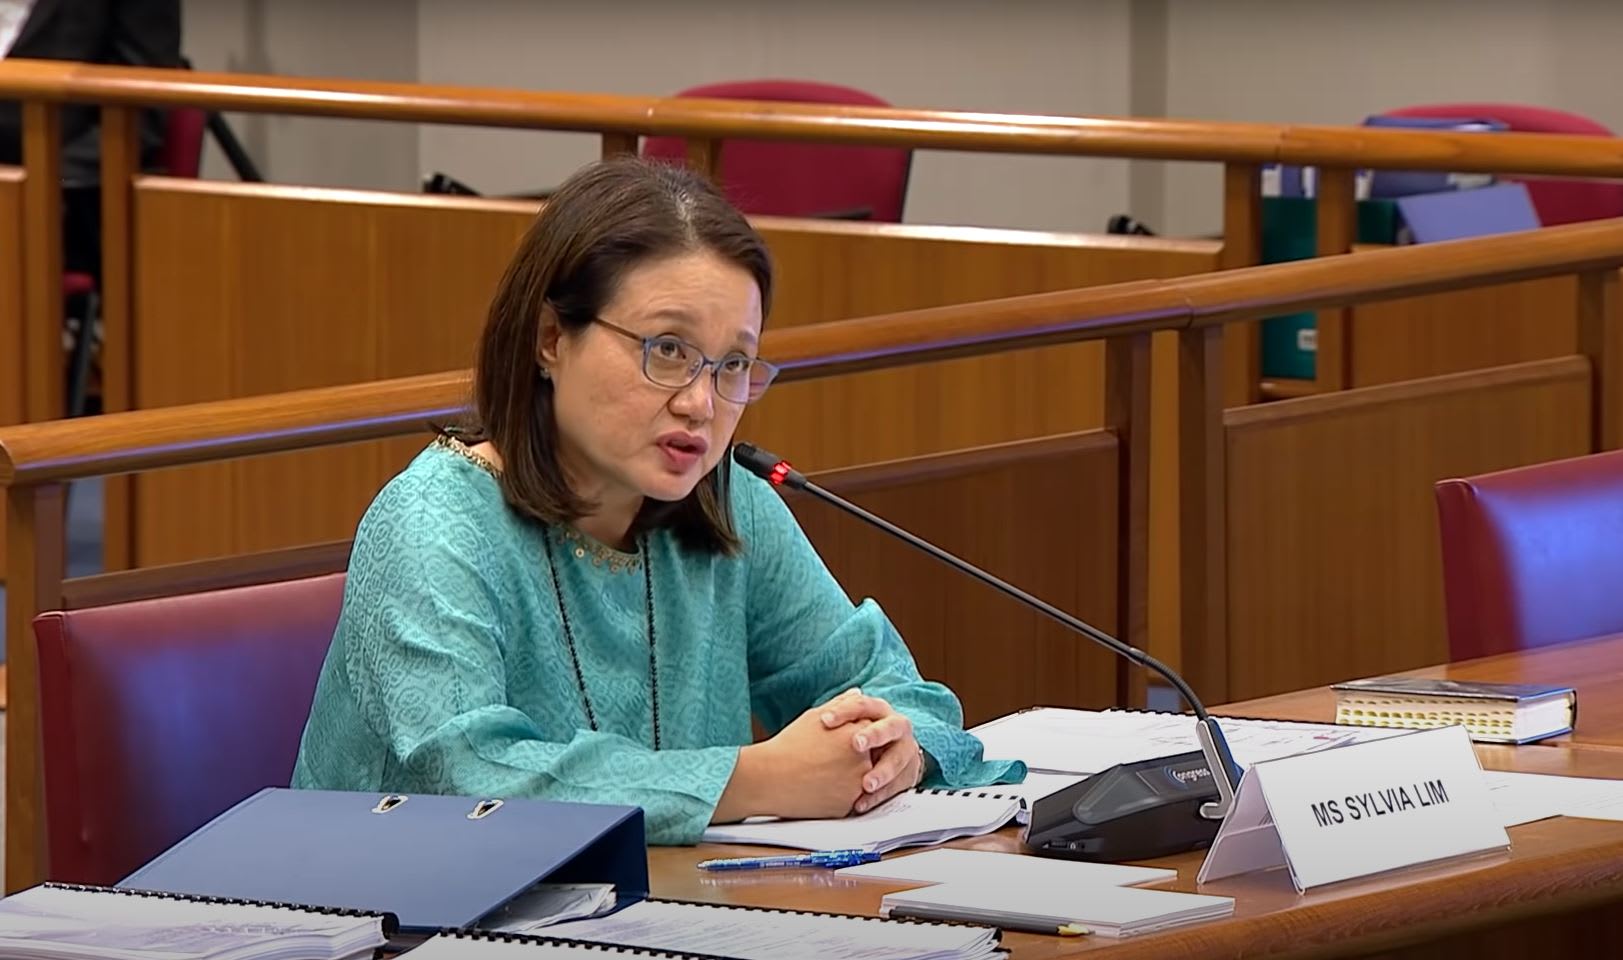 Ms Sylvia Lim (pictured) described the treatment that she had received as a witness during the Committee of Privileges hearings as bordering on “oppressive”.